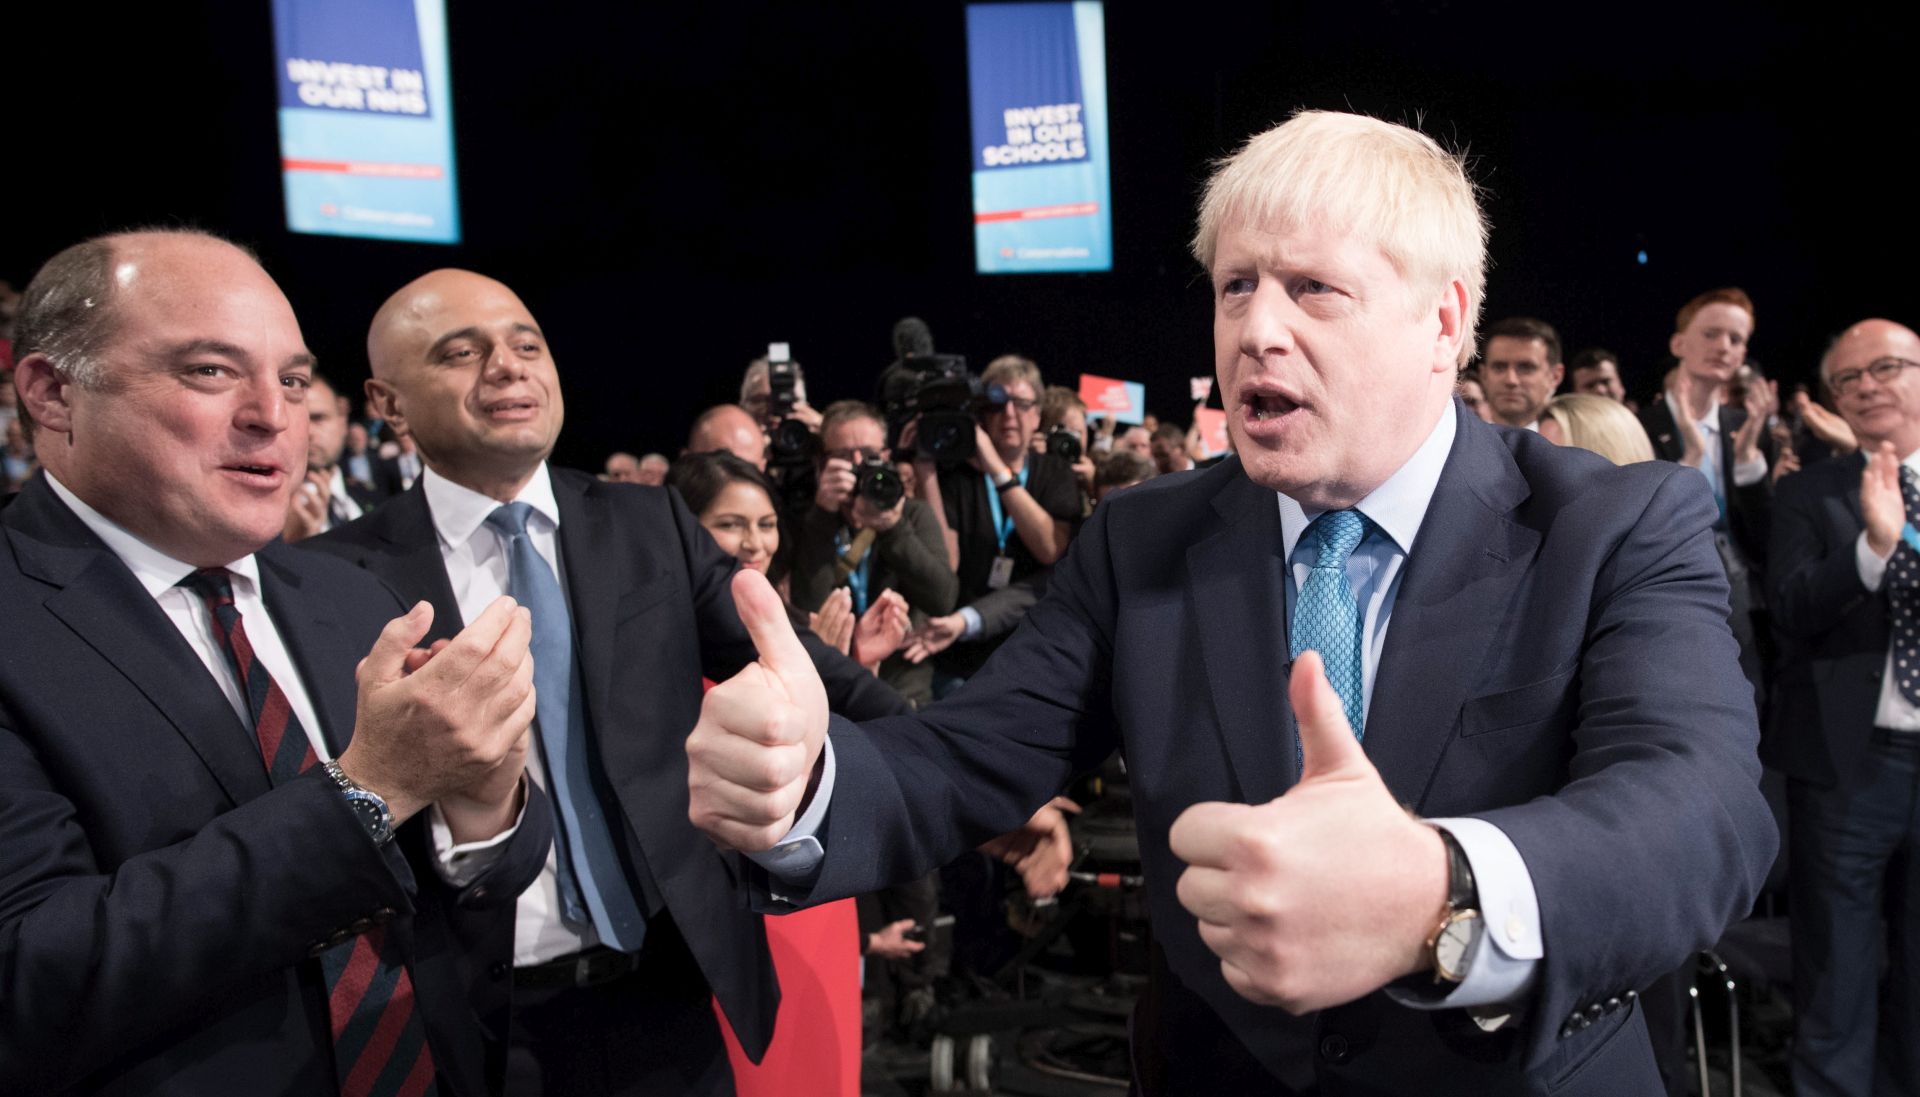 epa07889390 Prime Minister Boris Johnson, gives a thumbs up after delivering his speech during the Conservative Party Conference at the Manchester Convention Centre, Britain, 02 October 2019.  EPA/STEFAN ROUSSEAU / POOL